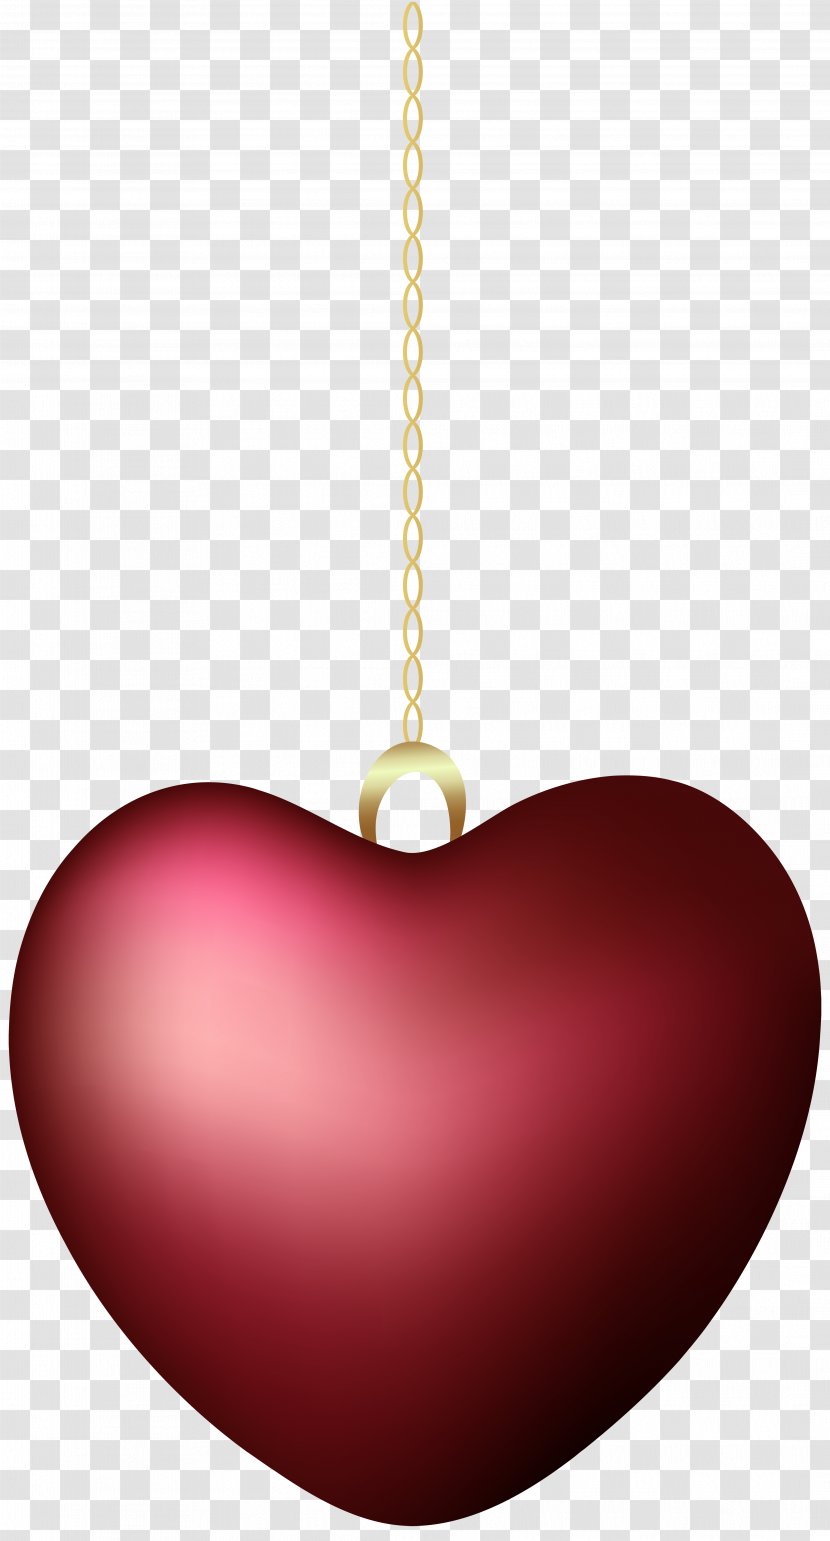 Heart Christmas Ornament Maroon Design - Red Hanging Clip Art Image Transparent PNG